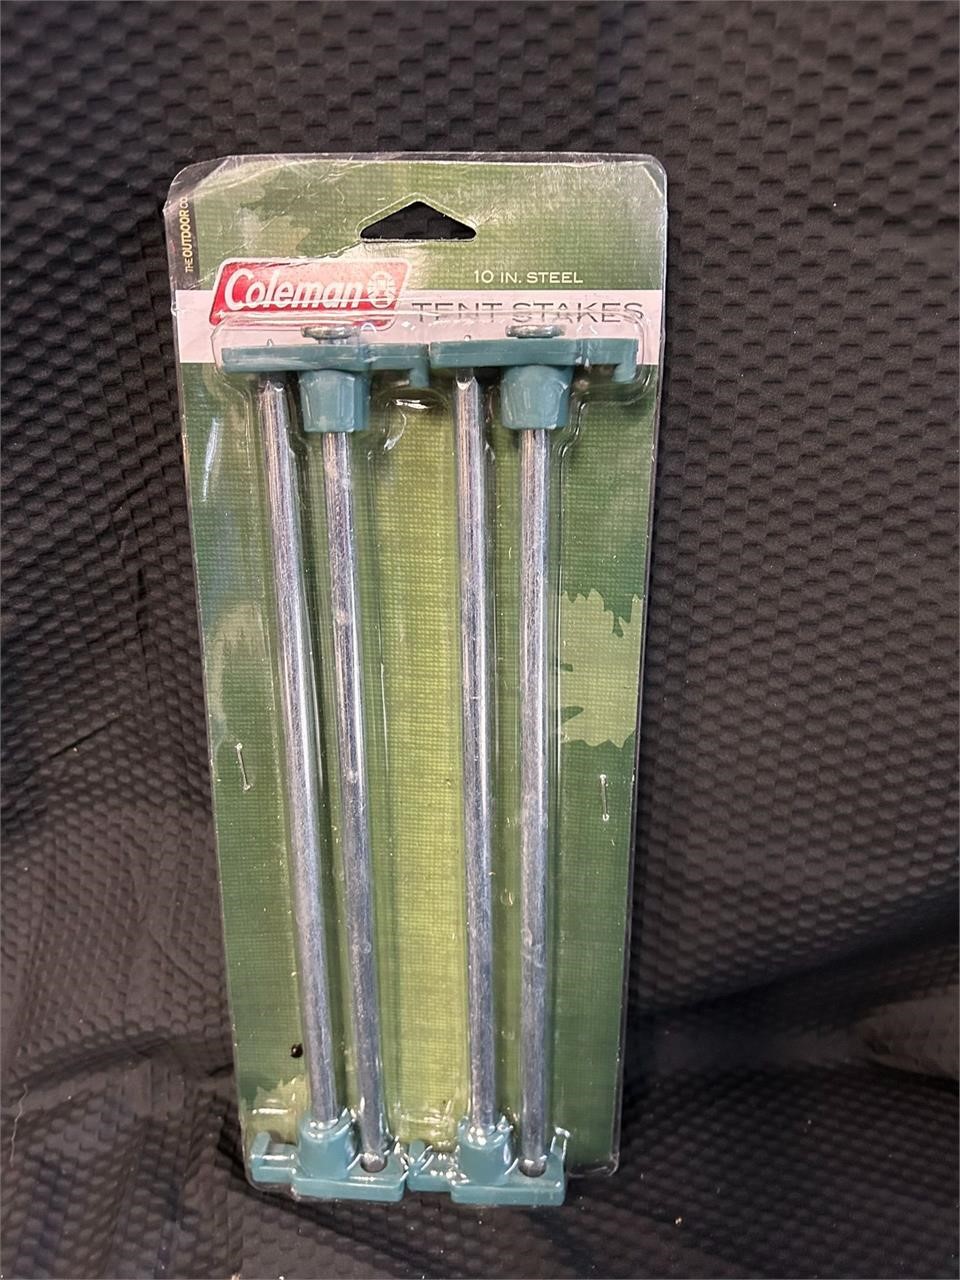 Coleman 10" Steel Tent Stakes in pkg